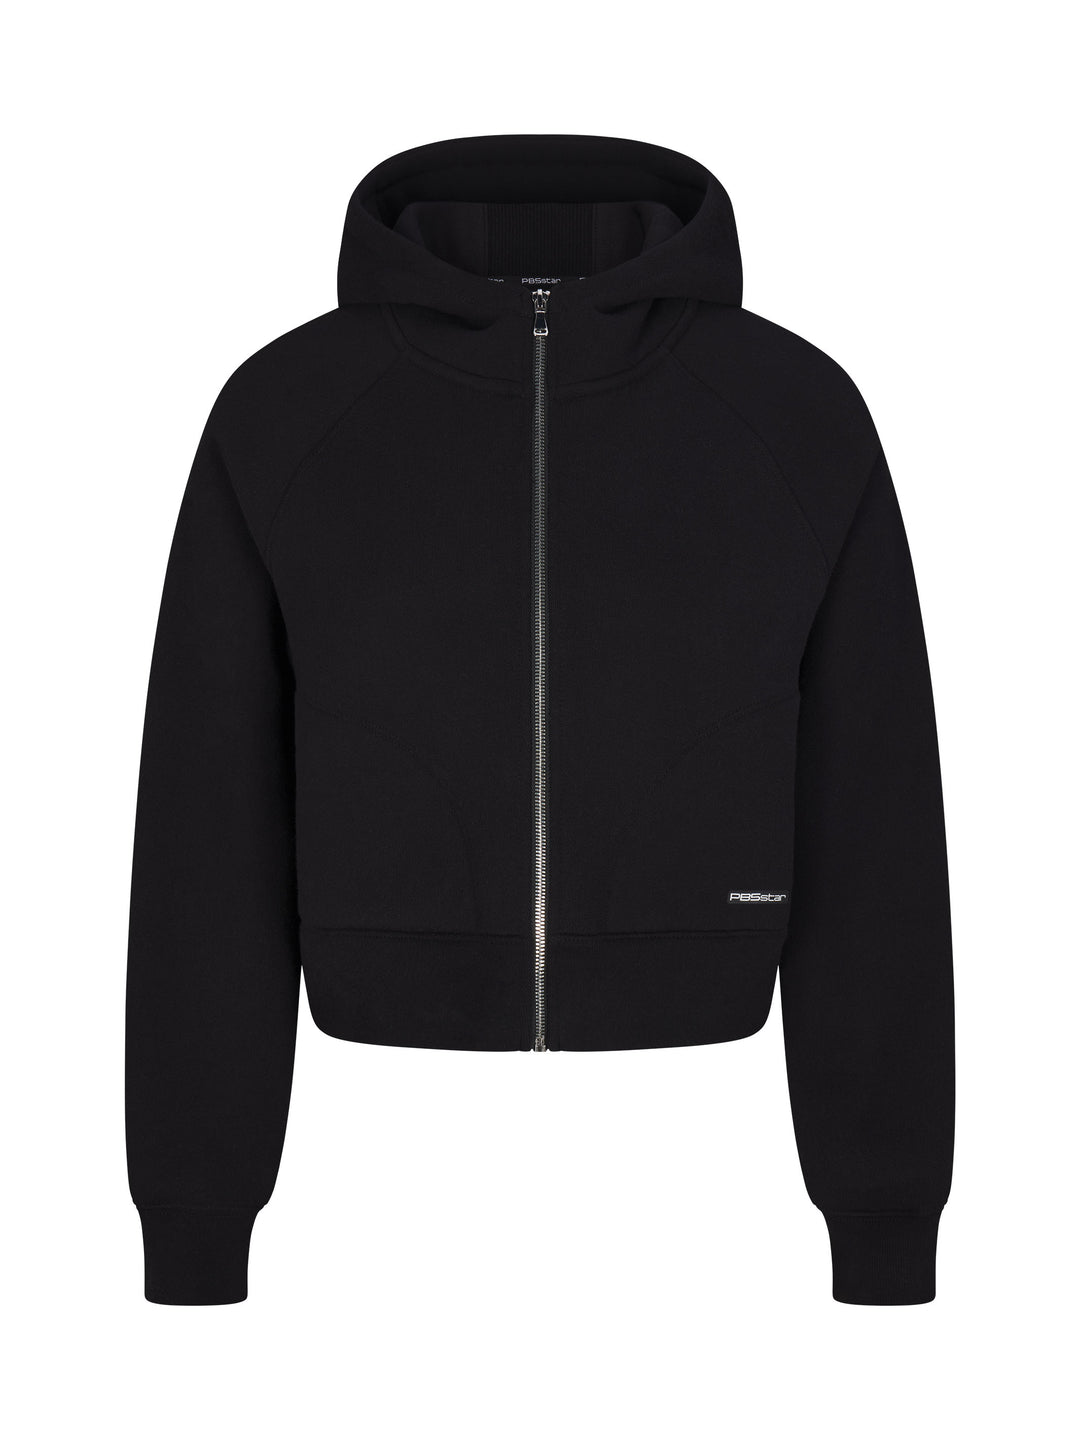 Women'a Luxe Cropped Lounge Hoodie with zipper front in black.